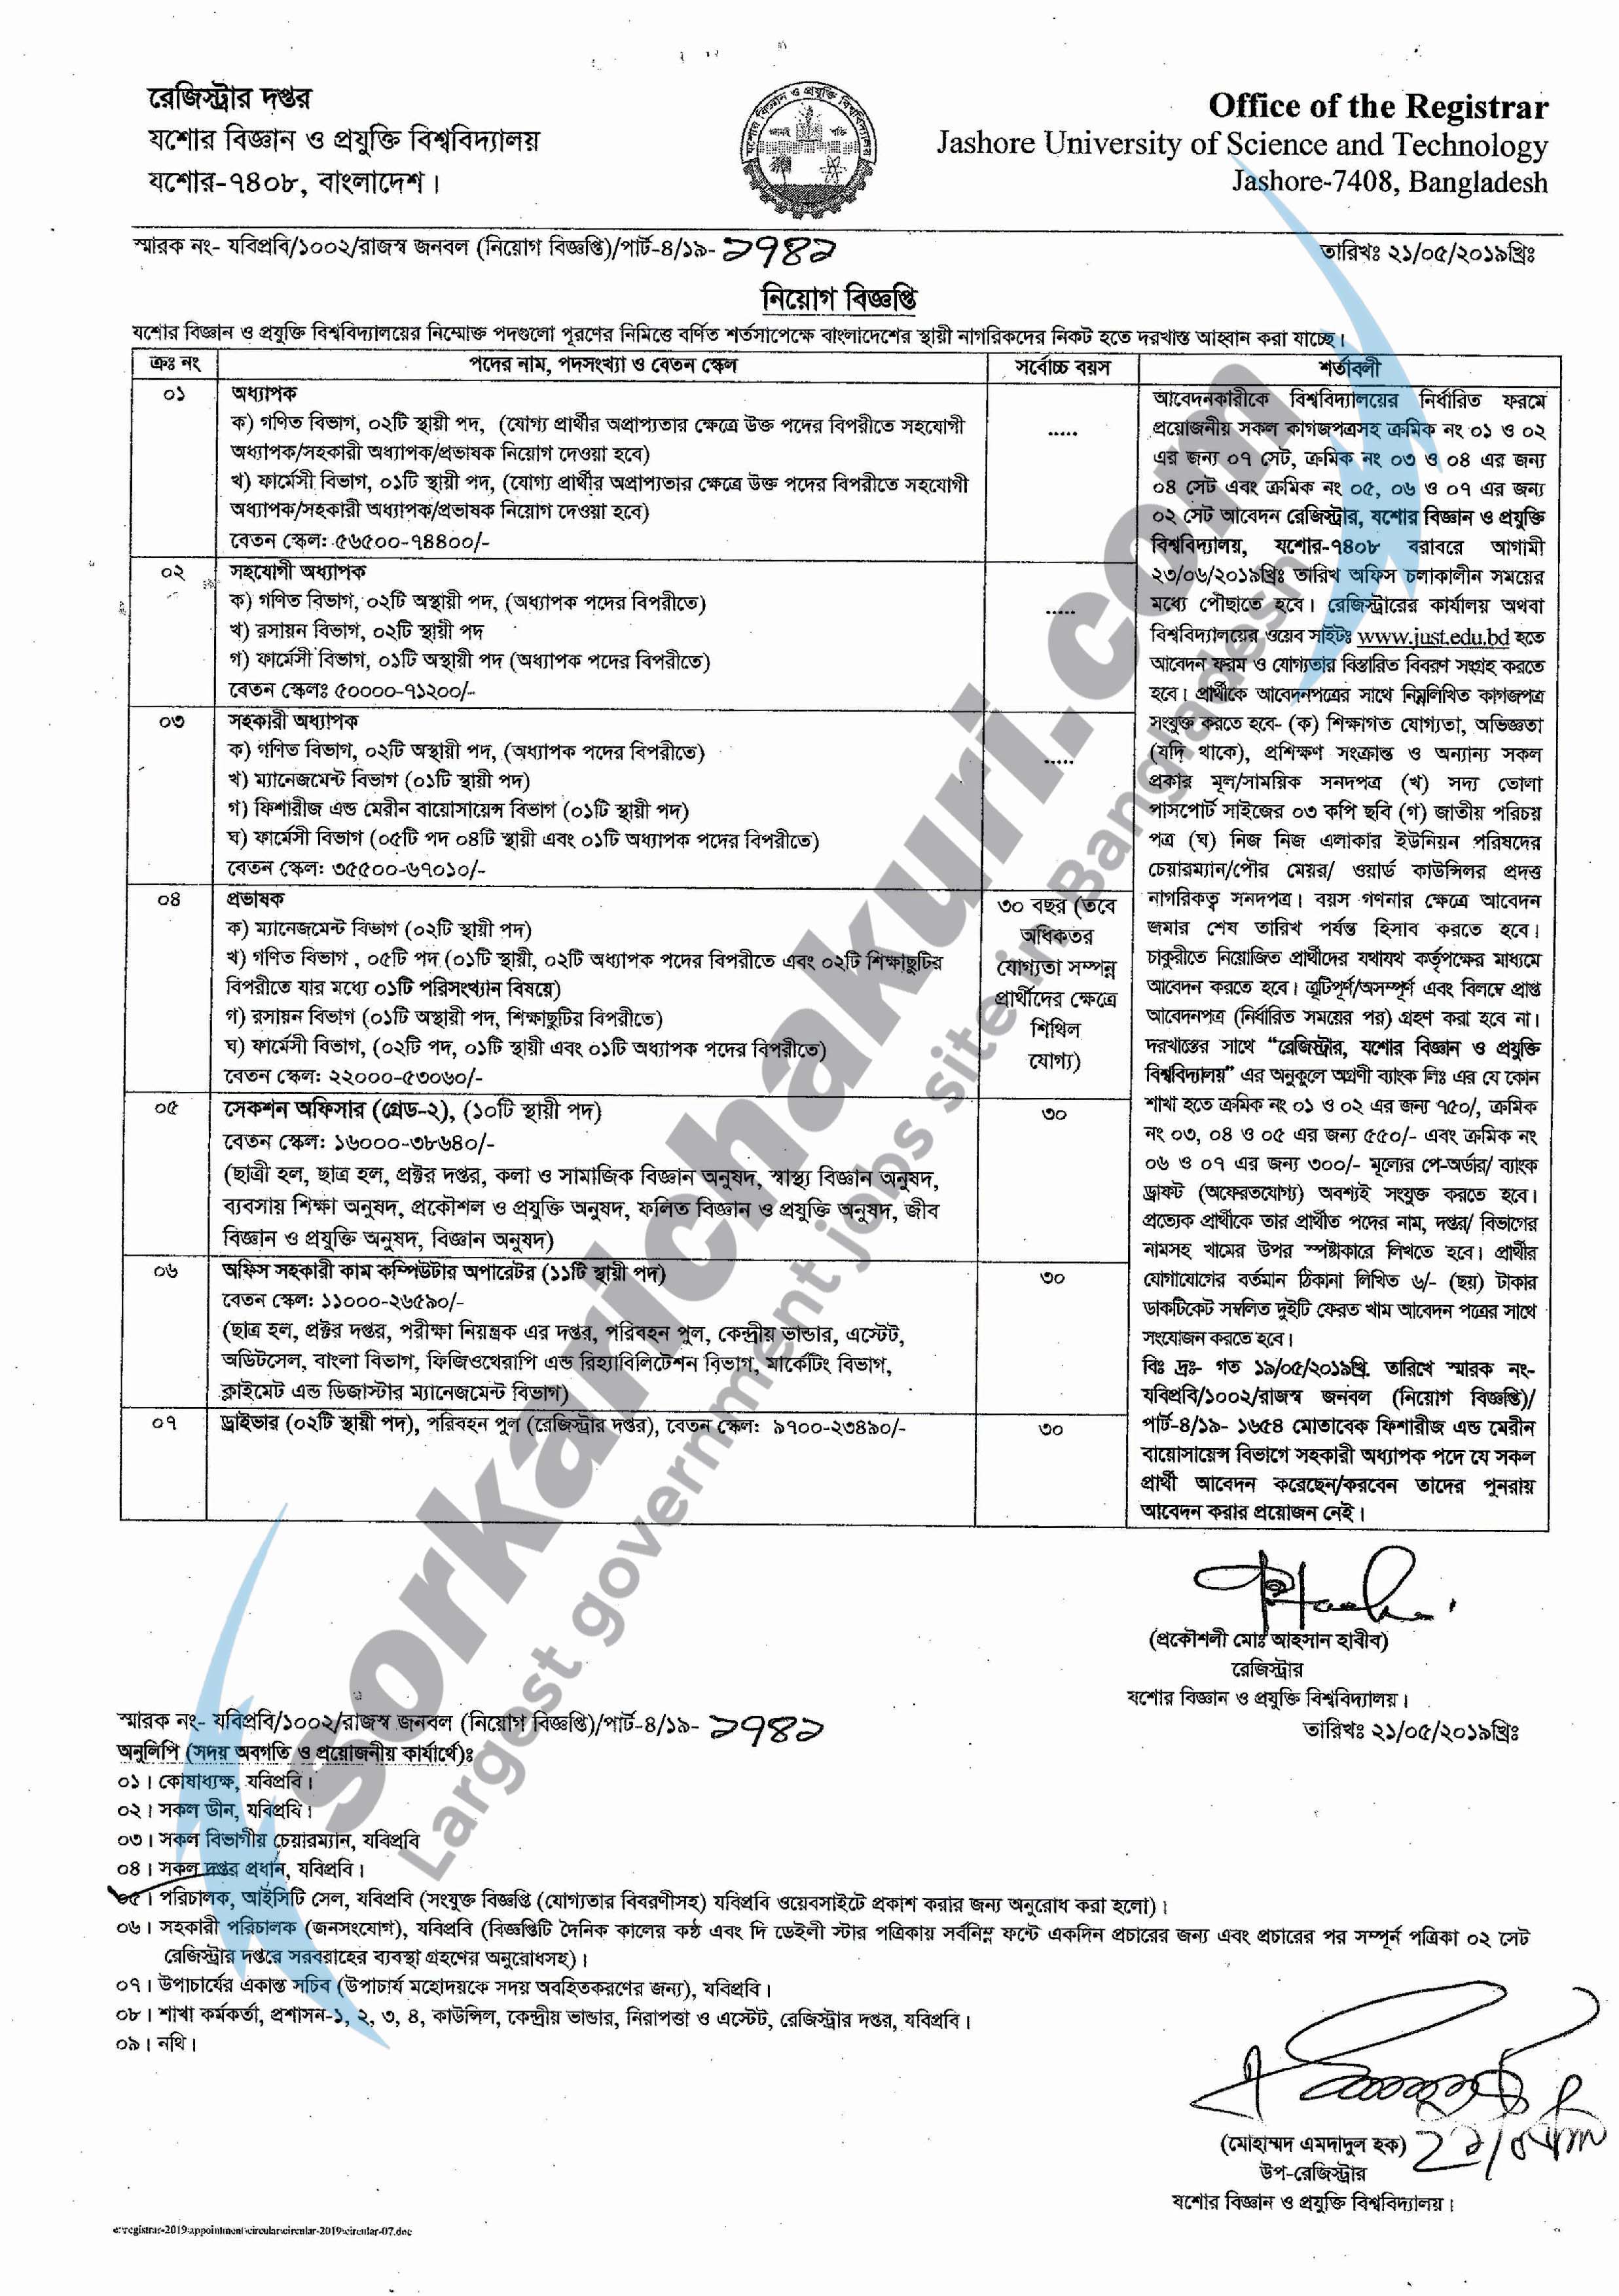 Jashore University of Science and Technology Jobs Circular 2019